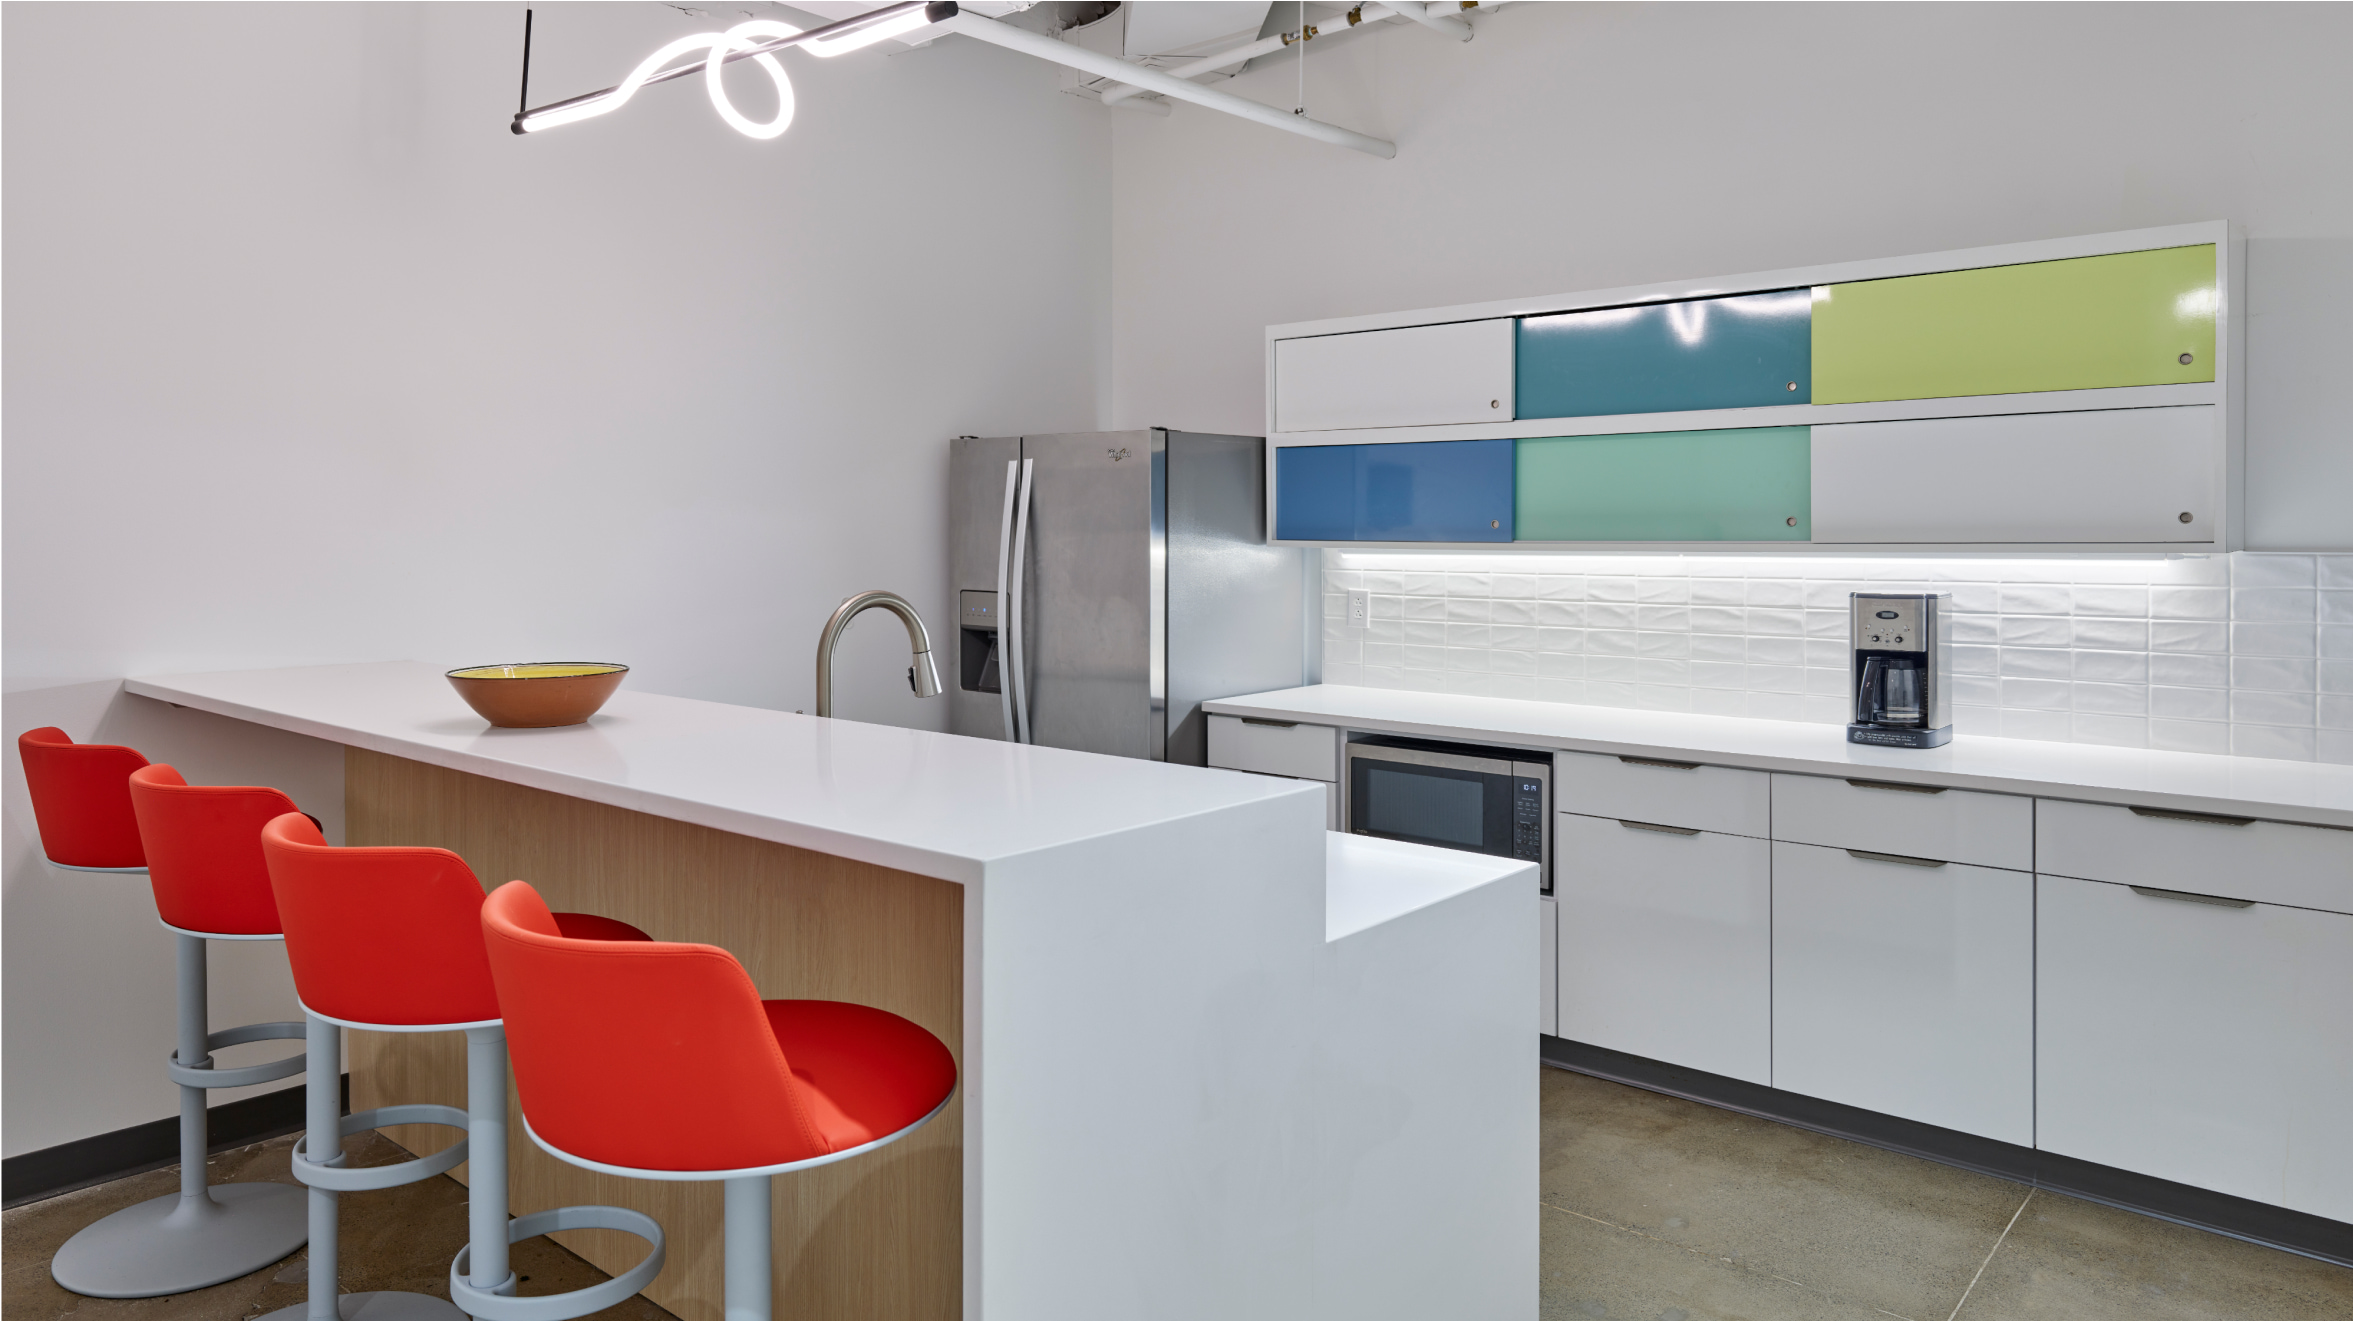 CPA kitchen with an island table, four red chairs, kitchen appliances and bright colored cabinets